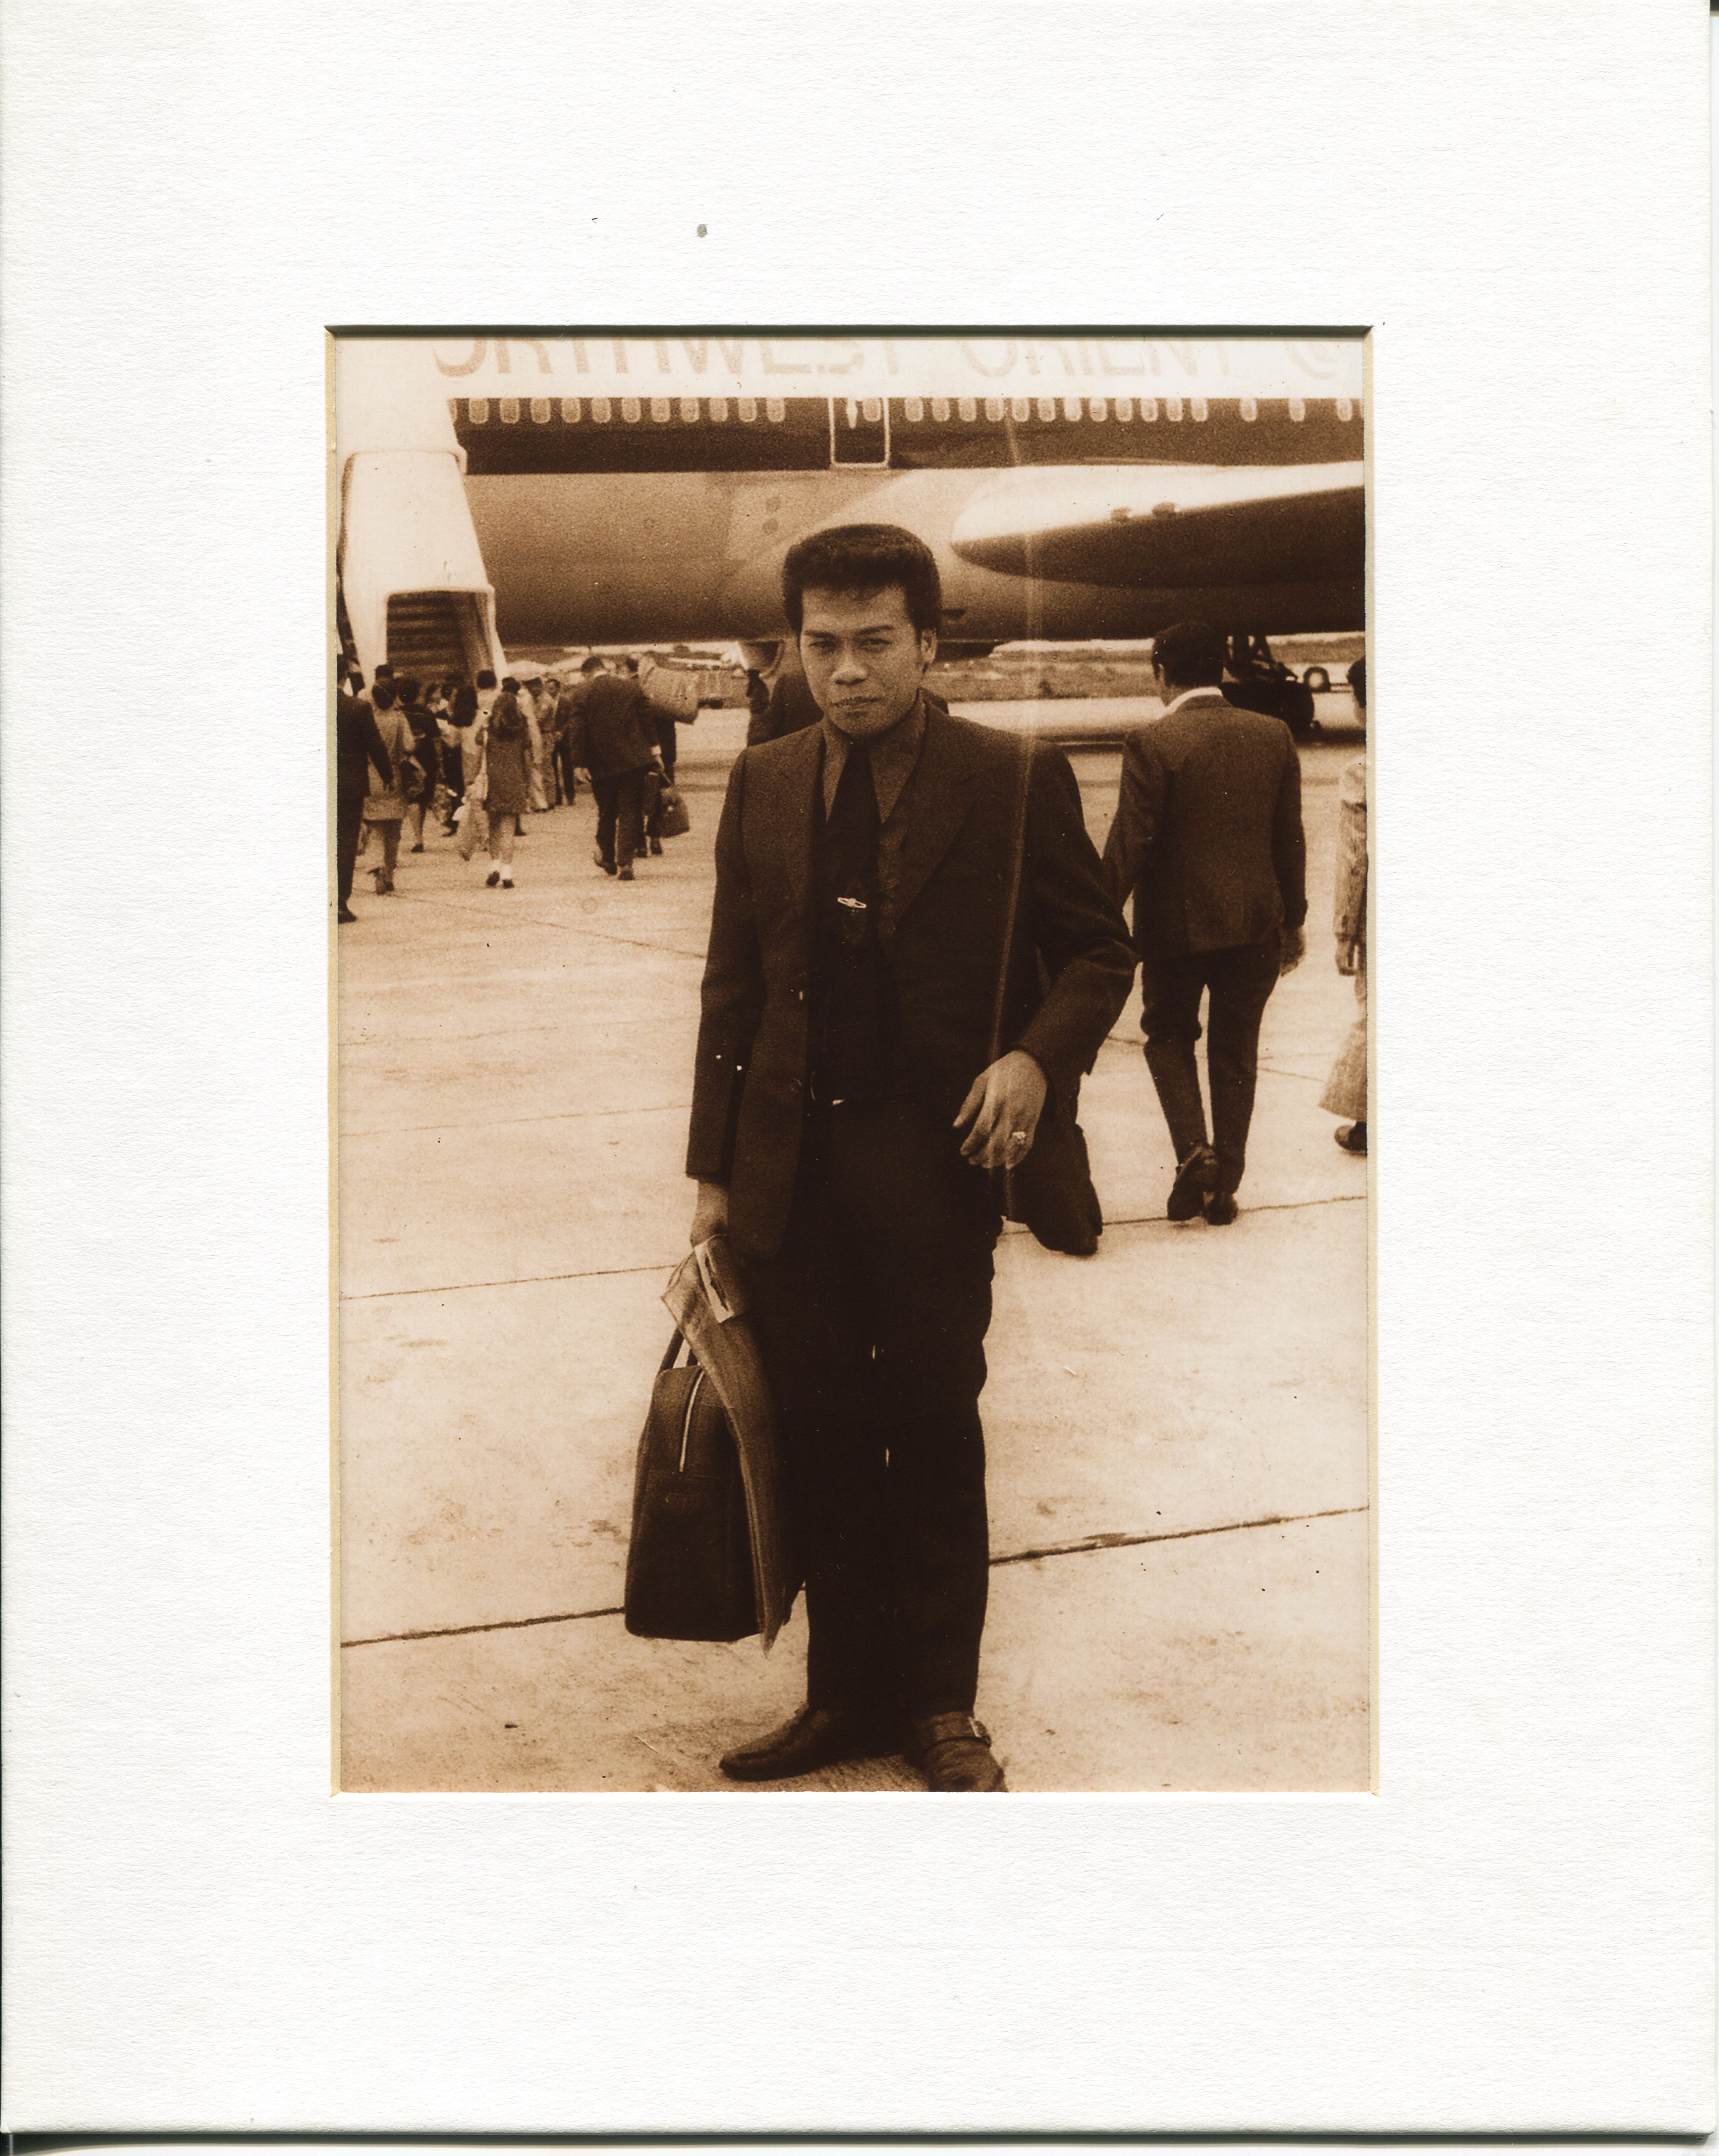 Photo of Virgilio Vergara, Vanessa Vergara's father, June 1972
Vergara learned about photo in 2012 from aunt who had the photo hanging on her wall in Solano, Nueva Vizcaya. The photo was taken at the Manila airport and shows Vergara’s father leaving for the US via the Northwest Orient. Pictured: Vergara’s father (Virgilio), “all dressed to the nines”.  Vergara’s paternal grandfather was a tailor at his shop, called Philippines Bazaar, therefore her father had a strong fashion sense. Vergara’s father is wearing a tie and coat and has a small piece of hand-carry luggage (containing his paperwork for emigration- all he brought with him.) He has a flat top haircut which was “in vogue at the time.” She said he has a nice smile and looks confident but a bit uneasy.  In 1972, Vergara’s father was the oldest of six and as such had a responsibility to help his family. Vergara said he emigrated for financial opportunities. Vergara’s father planned to enter the US at Port of Maine but, at the last minute, it was changed to Chicago. There, Vergara’s father met his future boss and future father-in-law. In 1970, Vergara’s mother was petitioned by her father, who was Virgilio’s boss. Vergara said she is very proud of how her father worked hard to come to the USA and encouraged his children to get the best education. Vergara wants to keep stories alive as was as heritage. 

Any views, findings, conclusions, or recommendations expressed in this story do not necessarily represent those of the National Endowment for the Humanities.  (c) Field Museum of Natural History - CC BY-NC 4.0